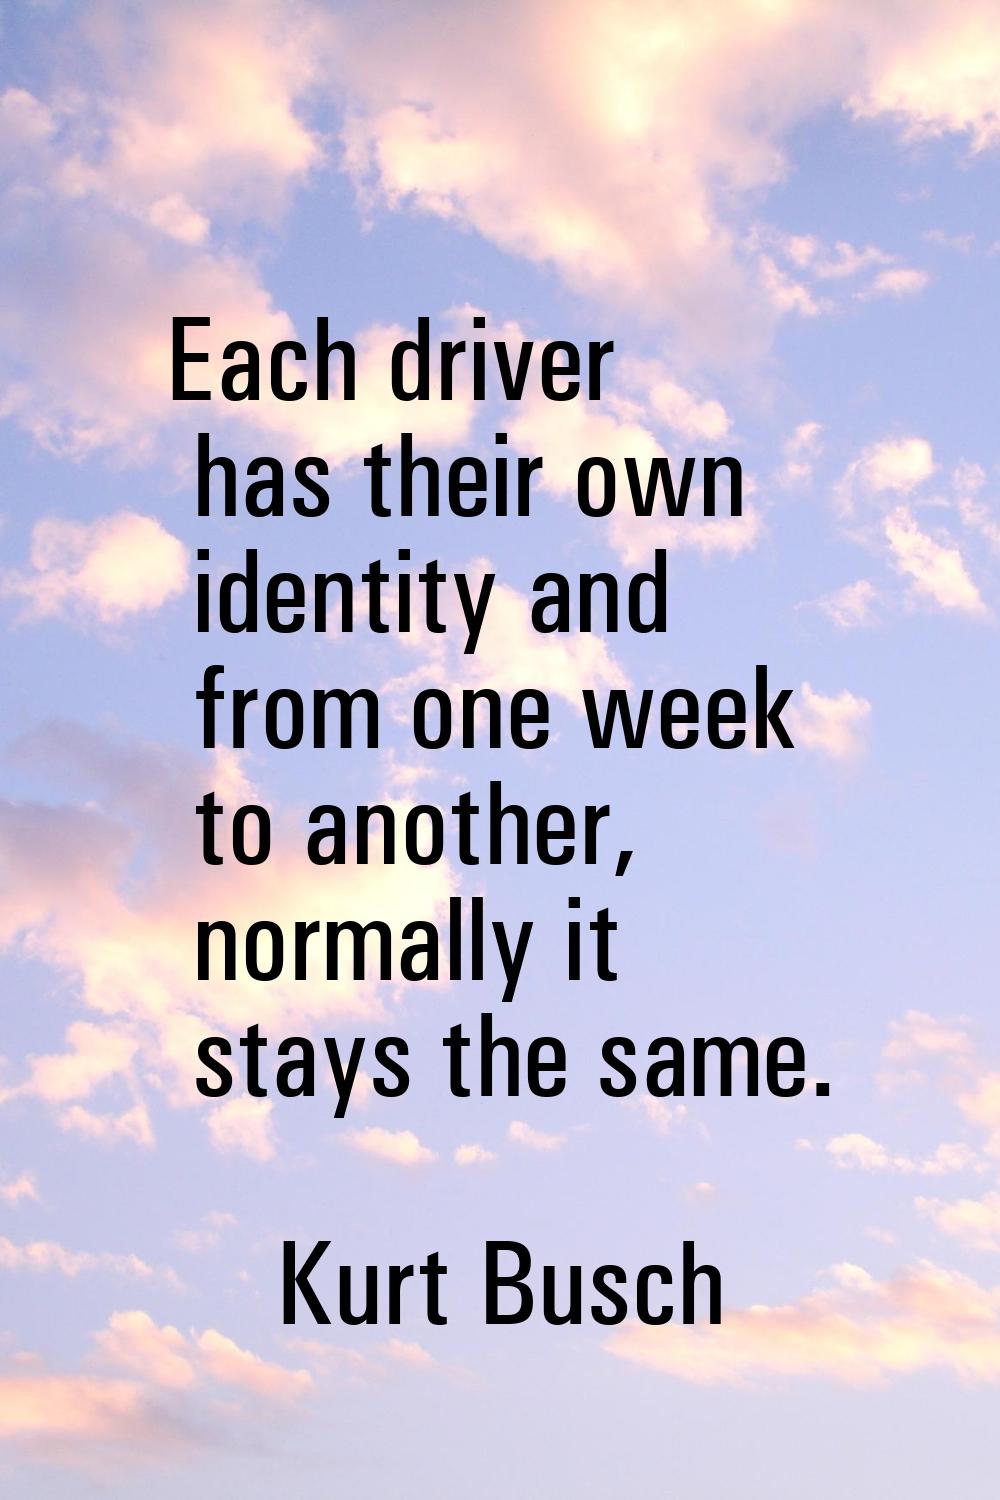 Each driver has their own identity and from one week to another, normally it stays the same.